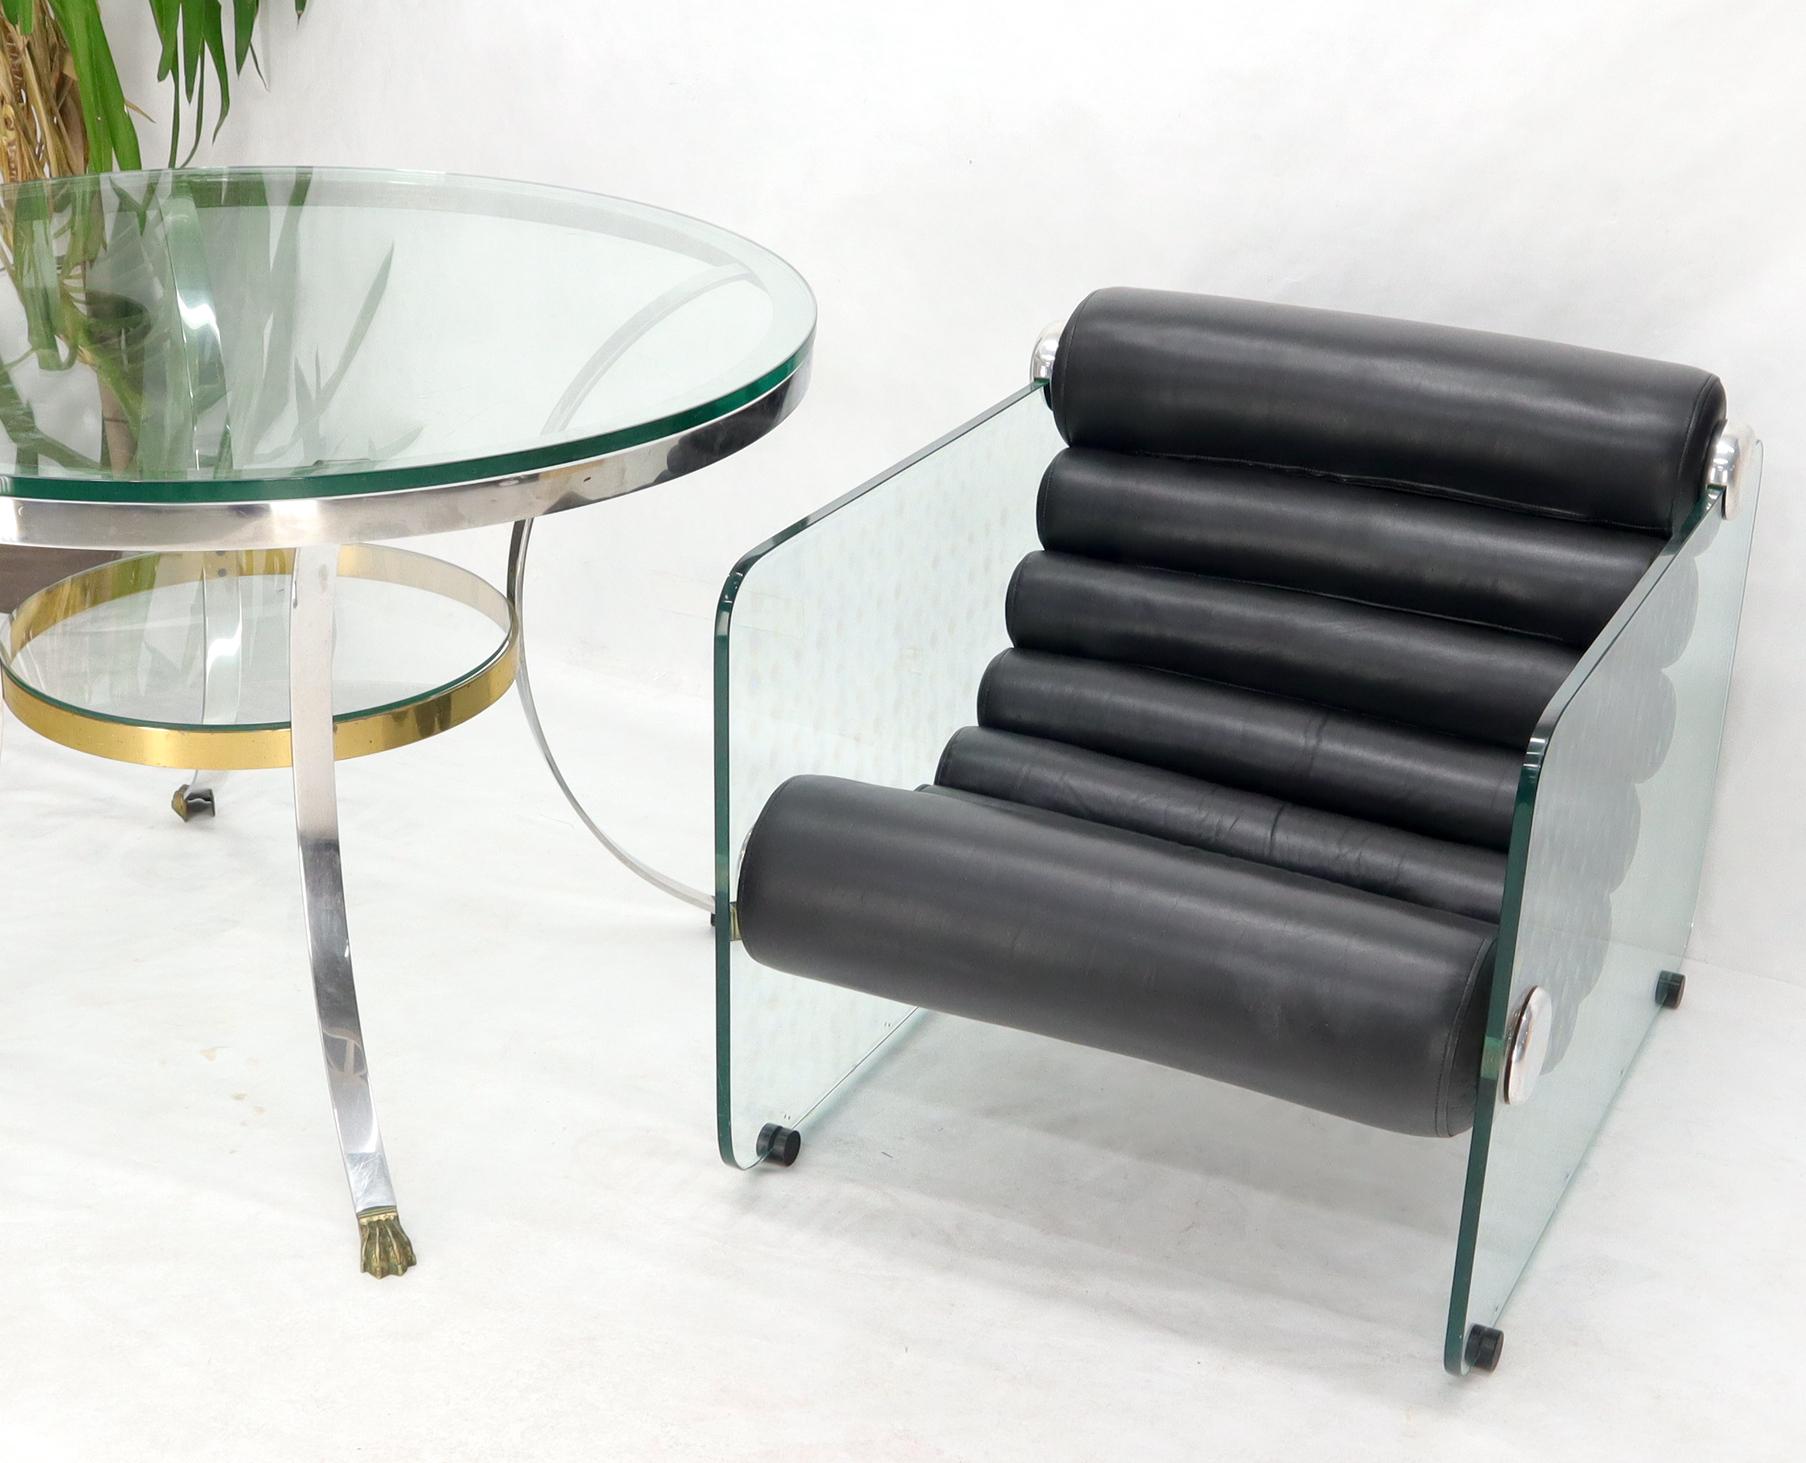 Fabio Lenci Hyaline Adjustable MCM Lounge Chair Glass Black Leather 1970s MINT! For Sale 5